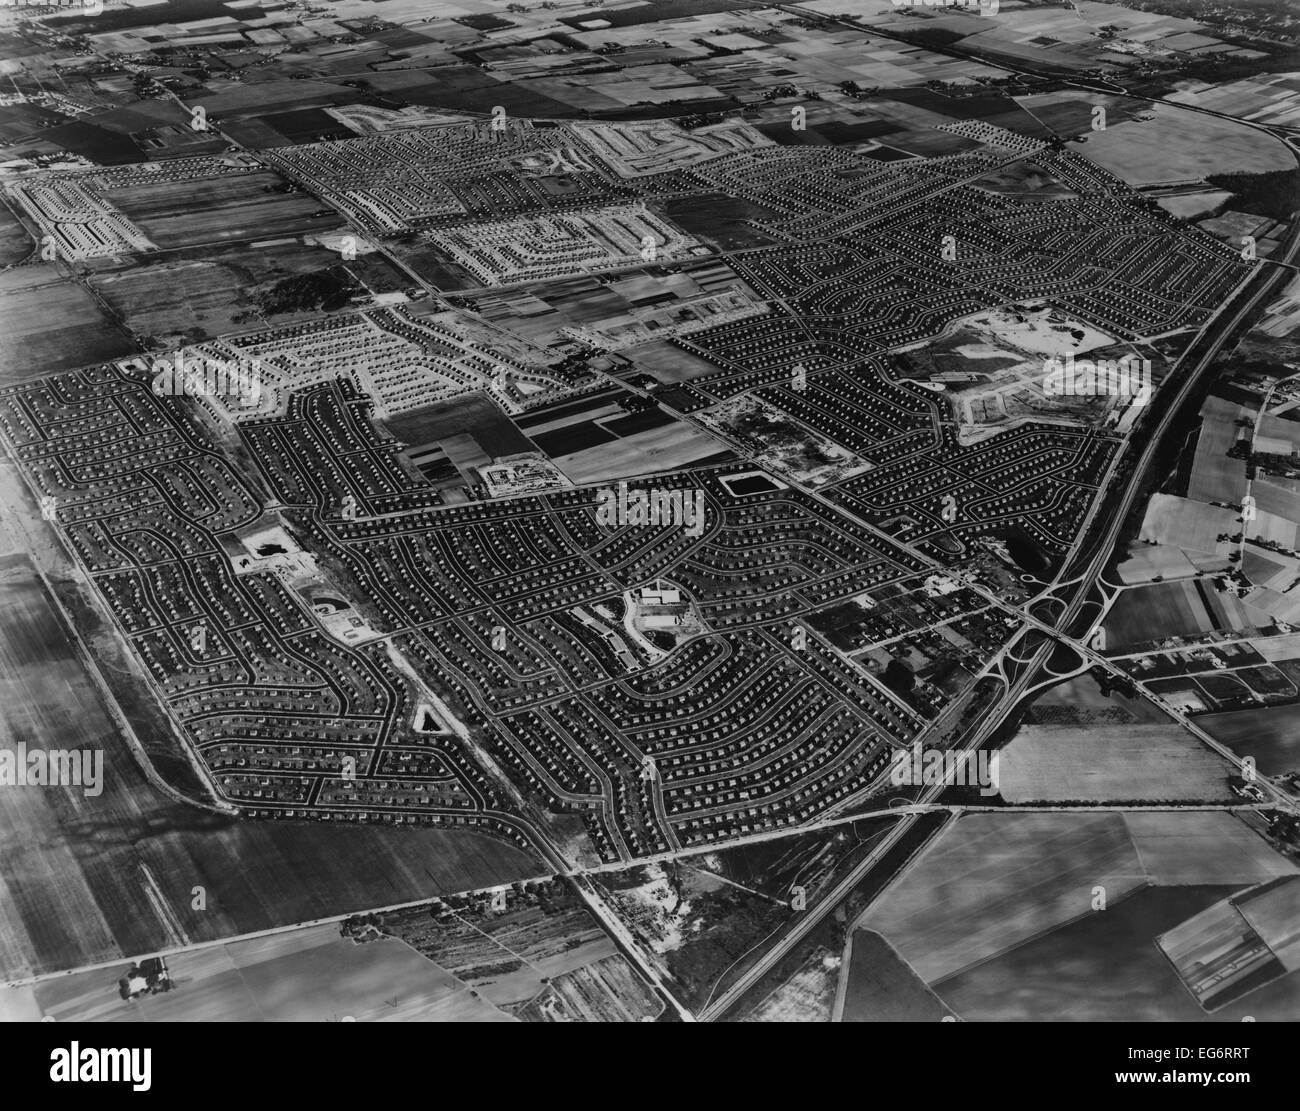 Aerial view of Levittown housing development on Long Island, New York. 1954. (BSLOC 2014 13 144) Stock Photo